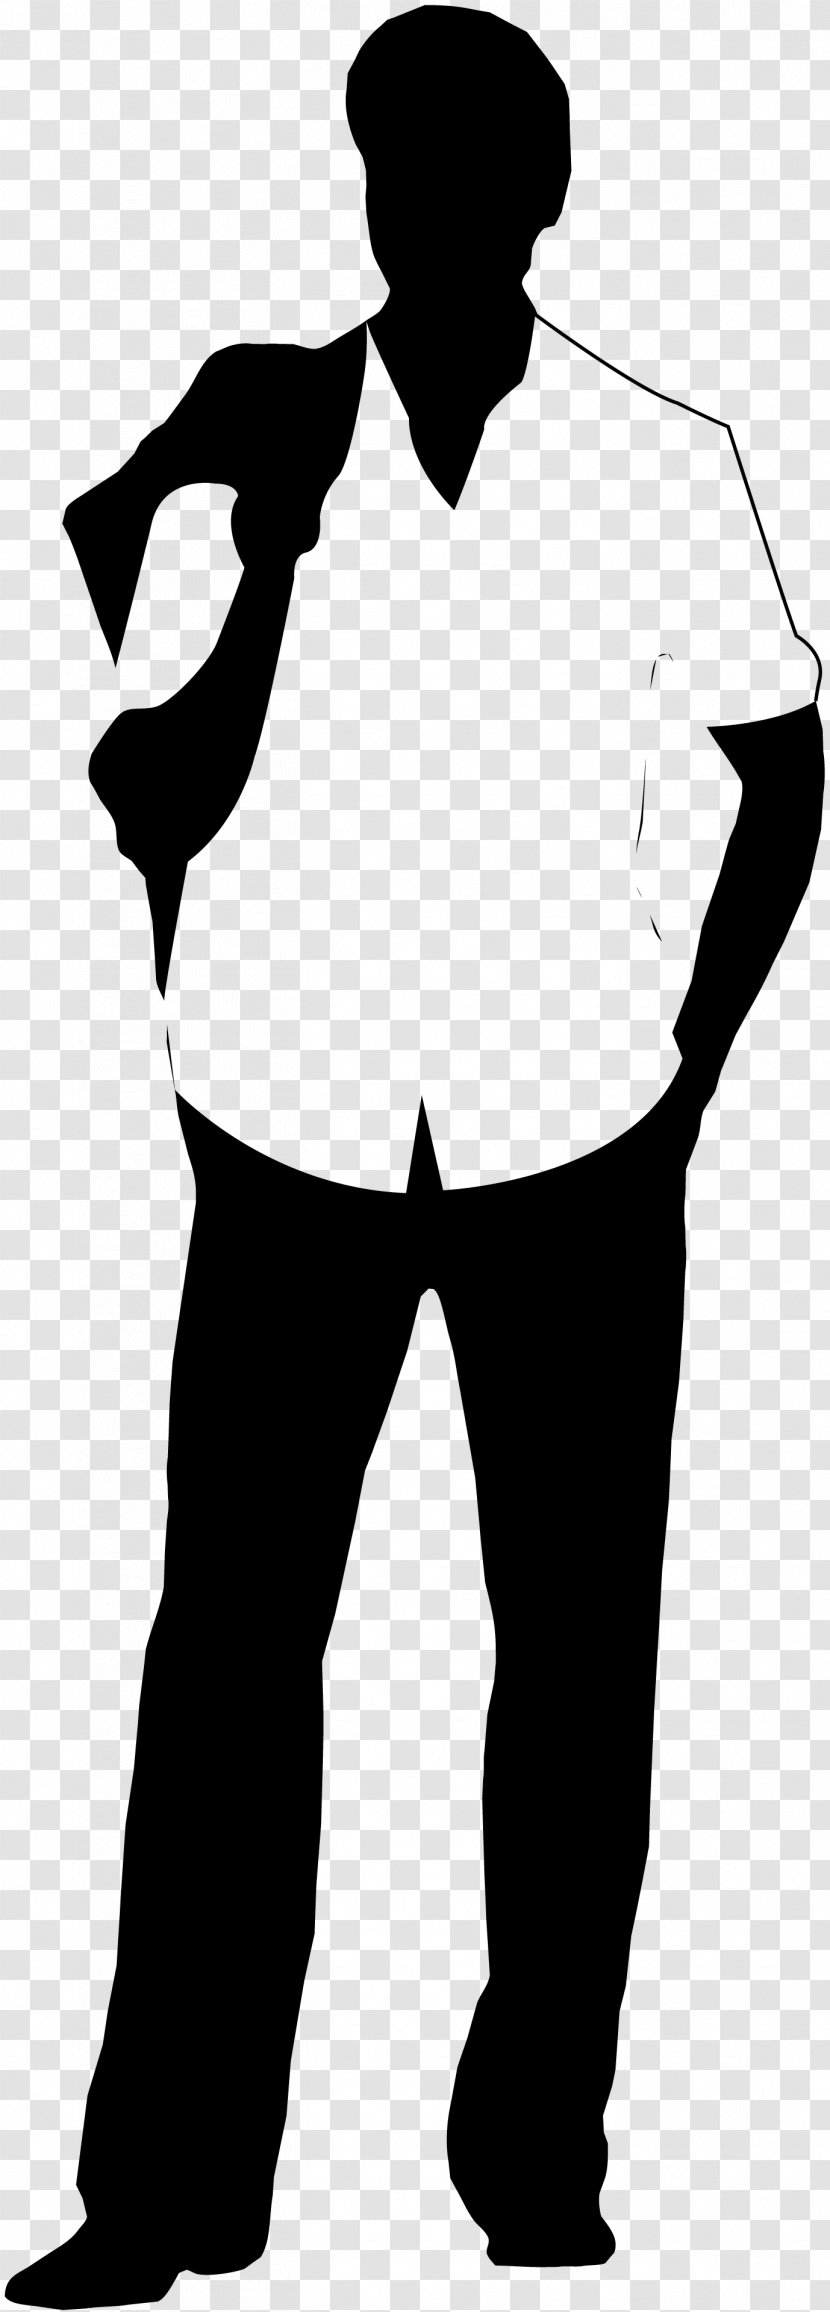 Silhouette Clothing Costume - Black And White Transparent PNG